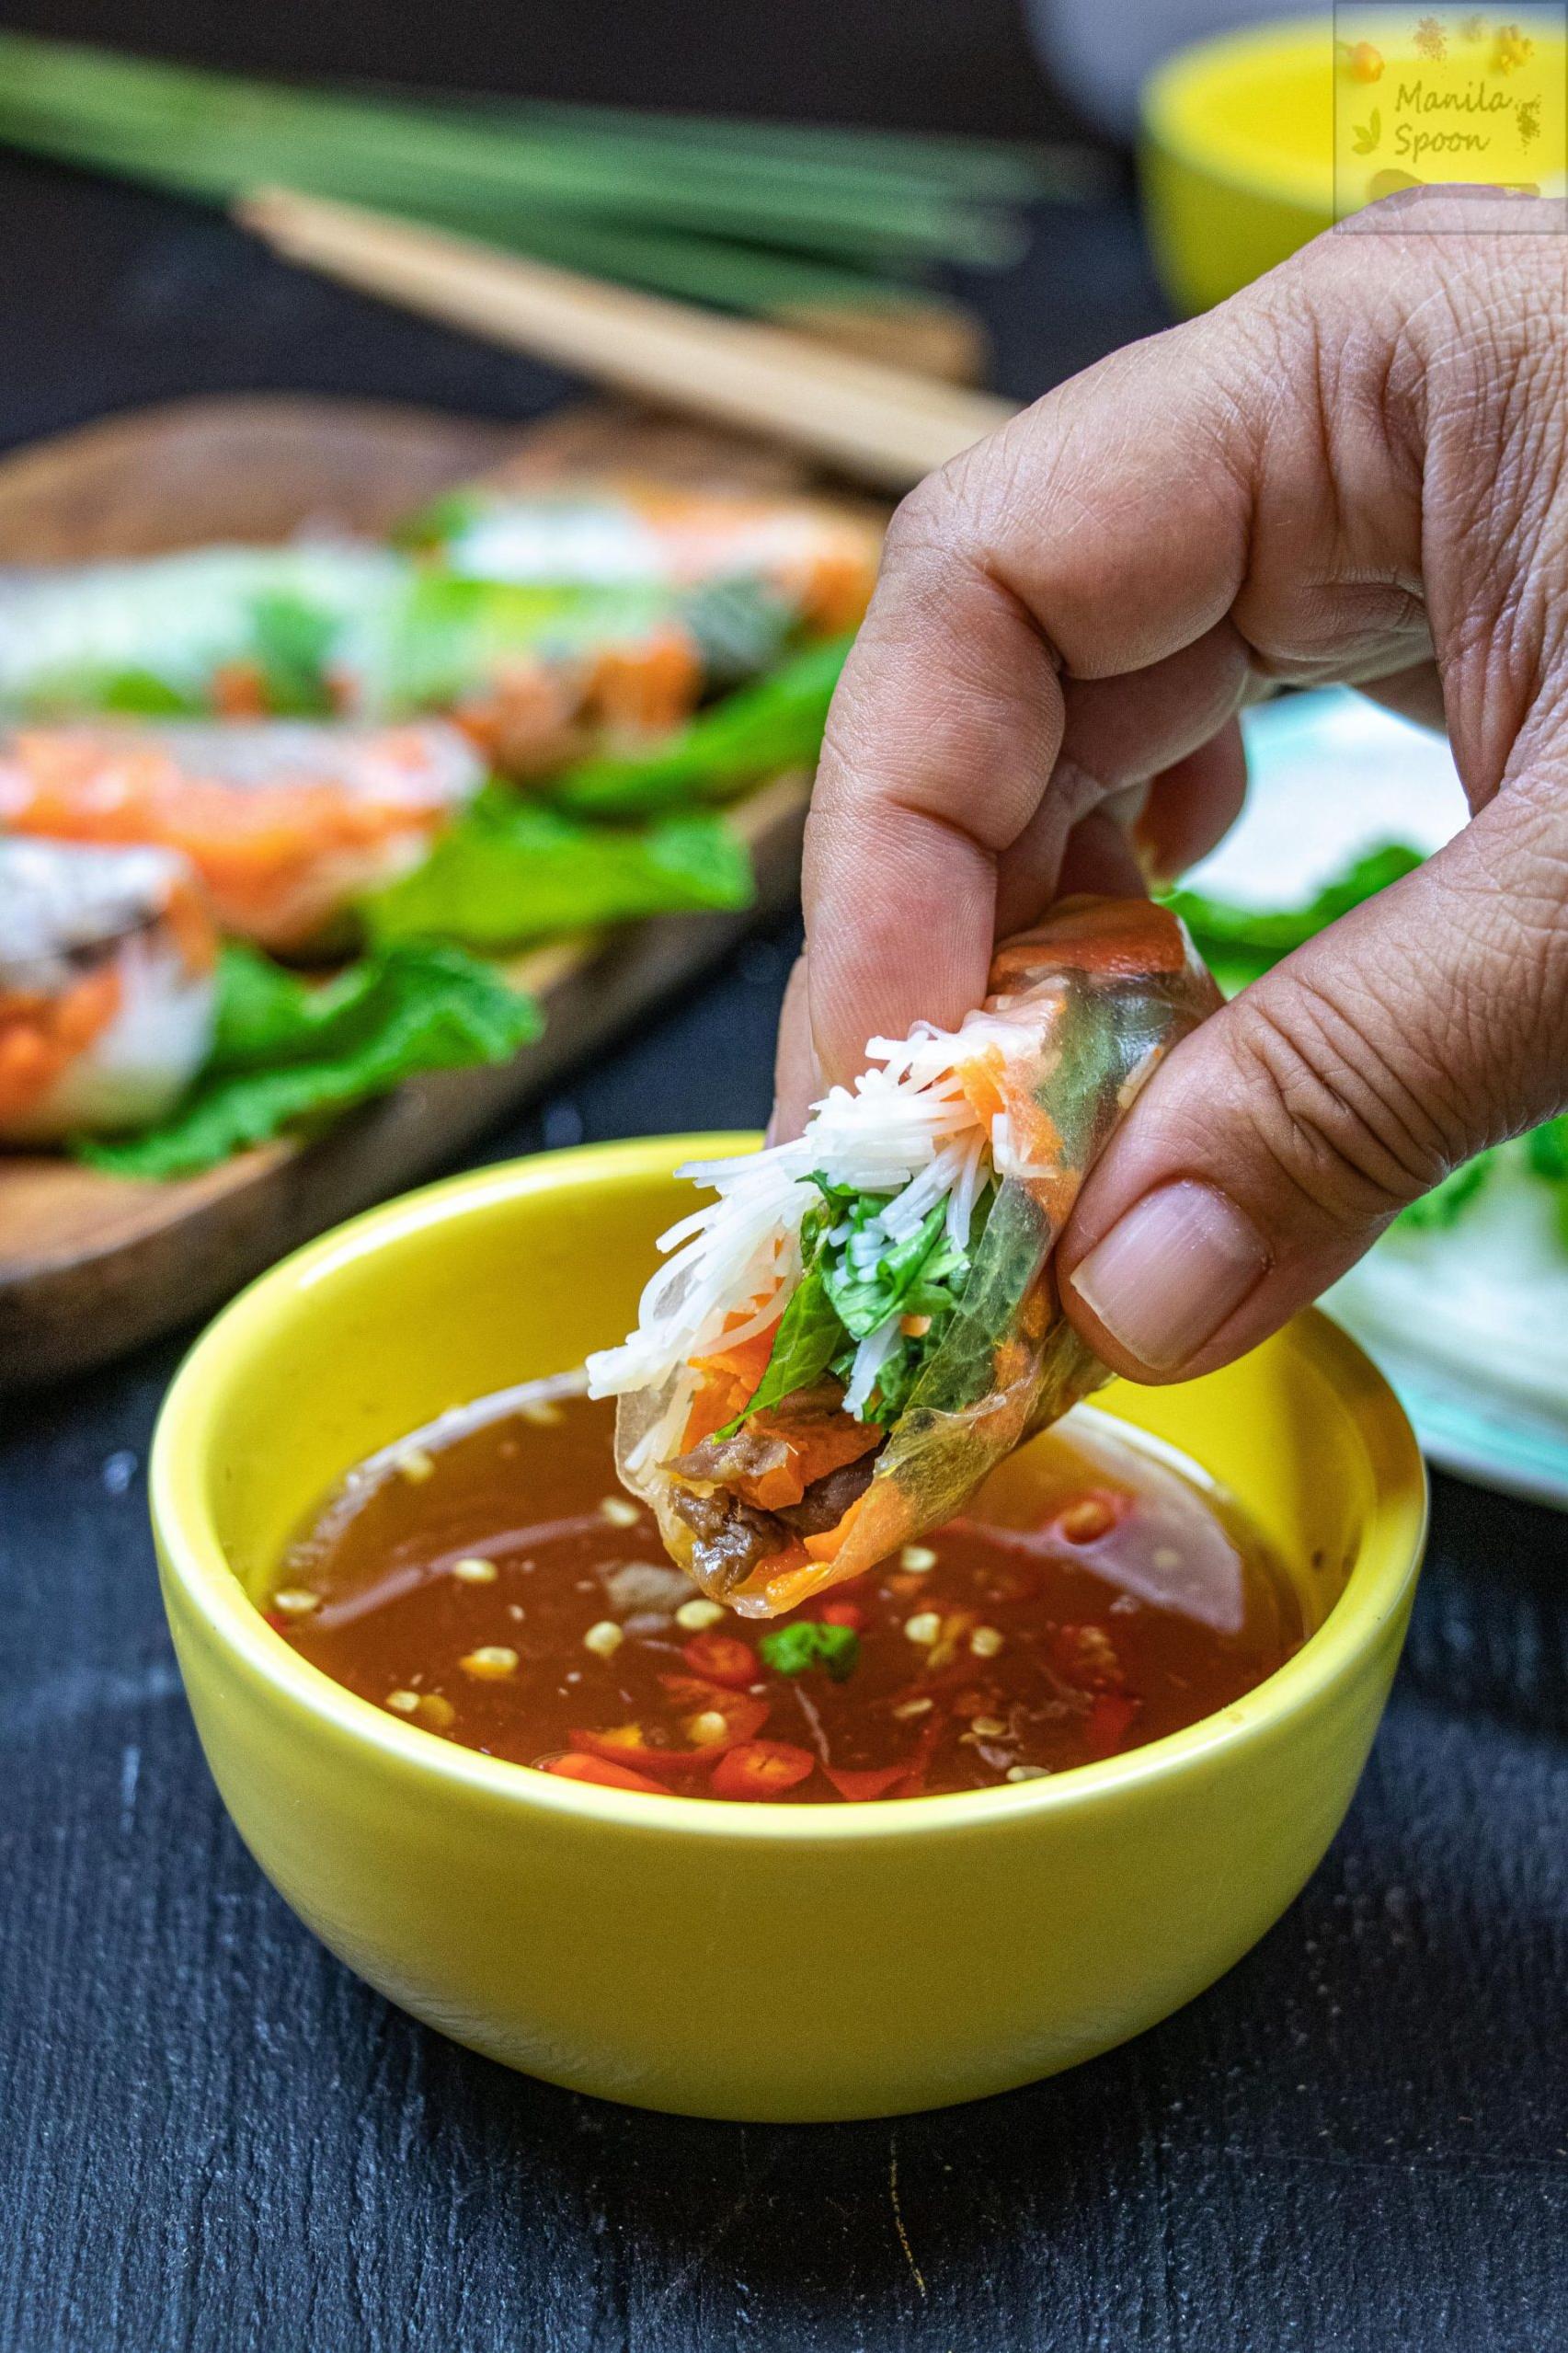  Keep calm and dip on with this Vietnamese-inspired dipping sauce